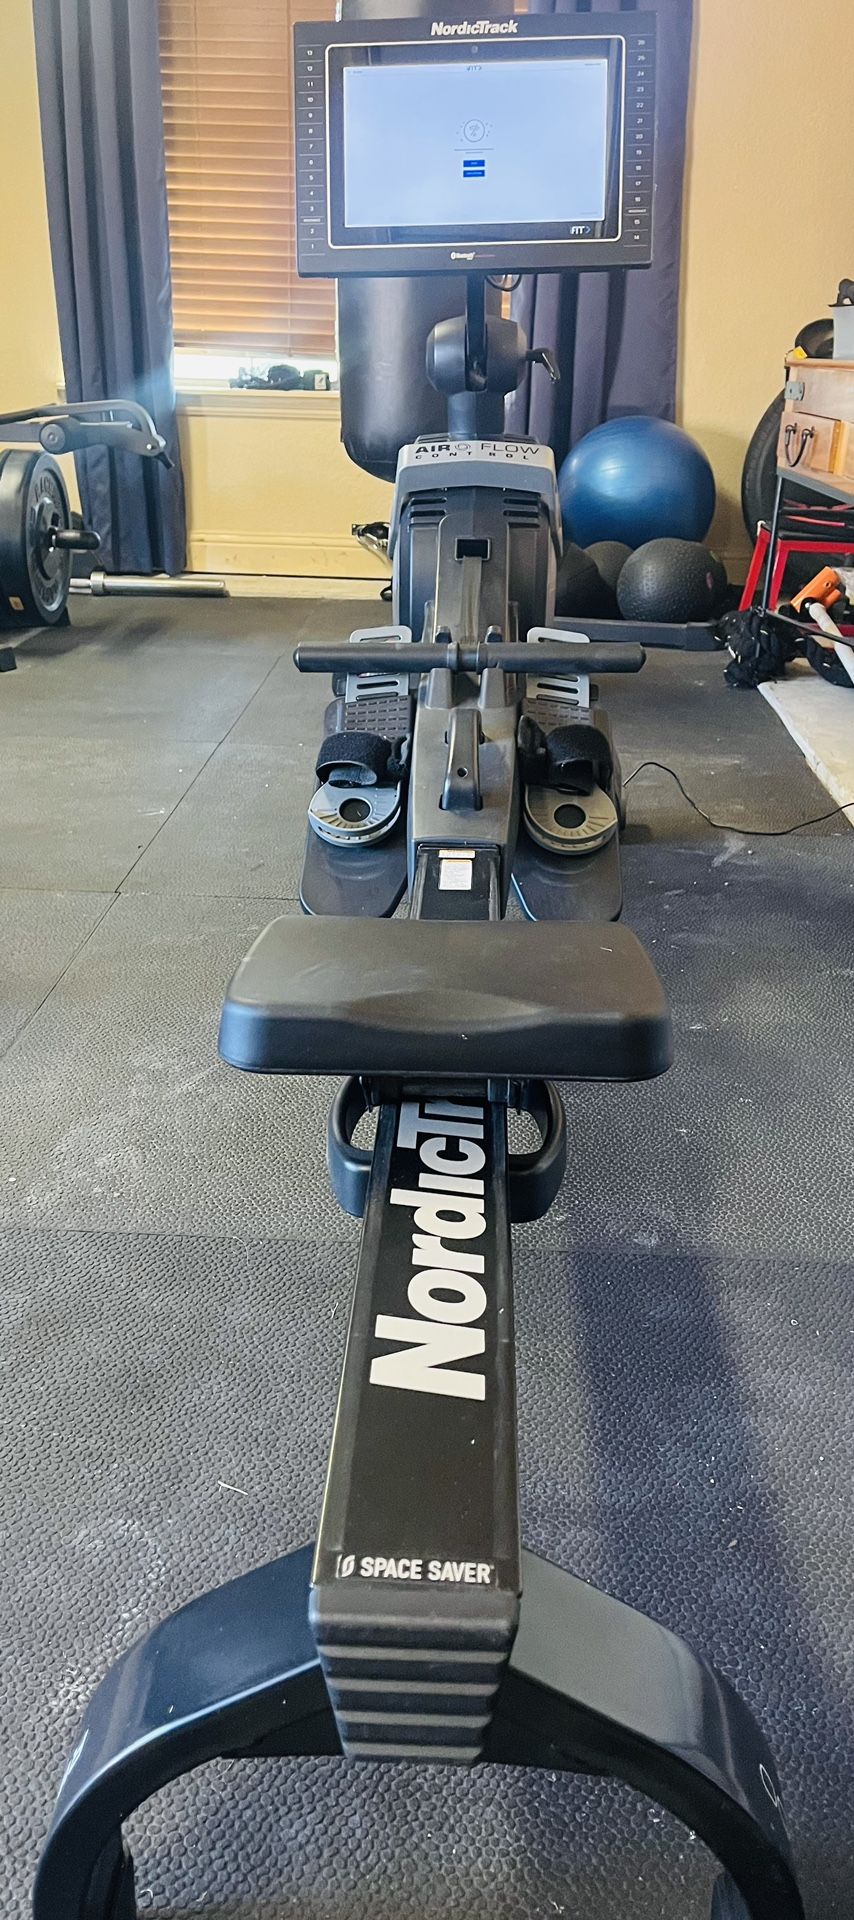 NordicTrack 700RW Rower (Like new)